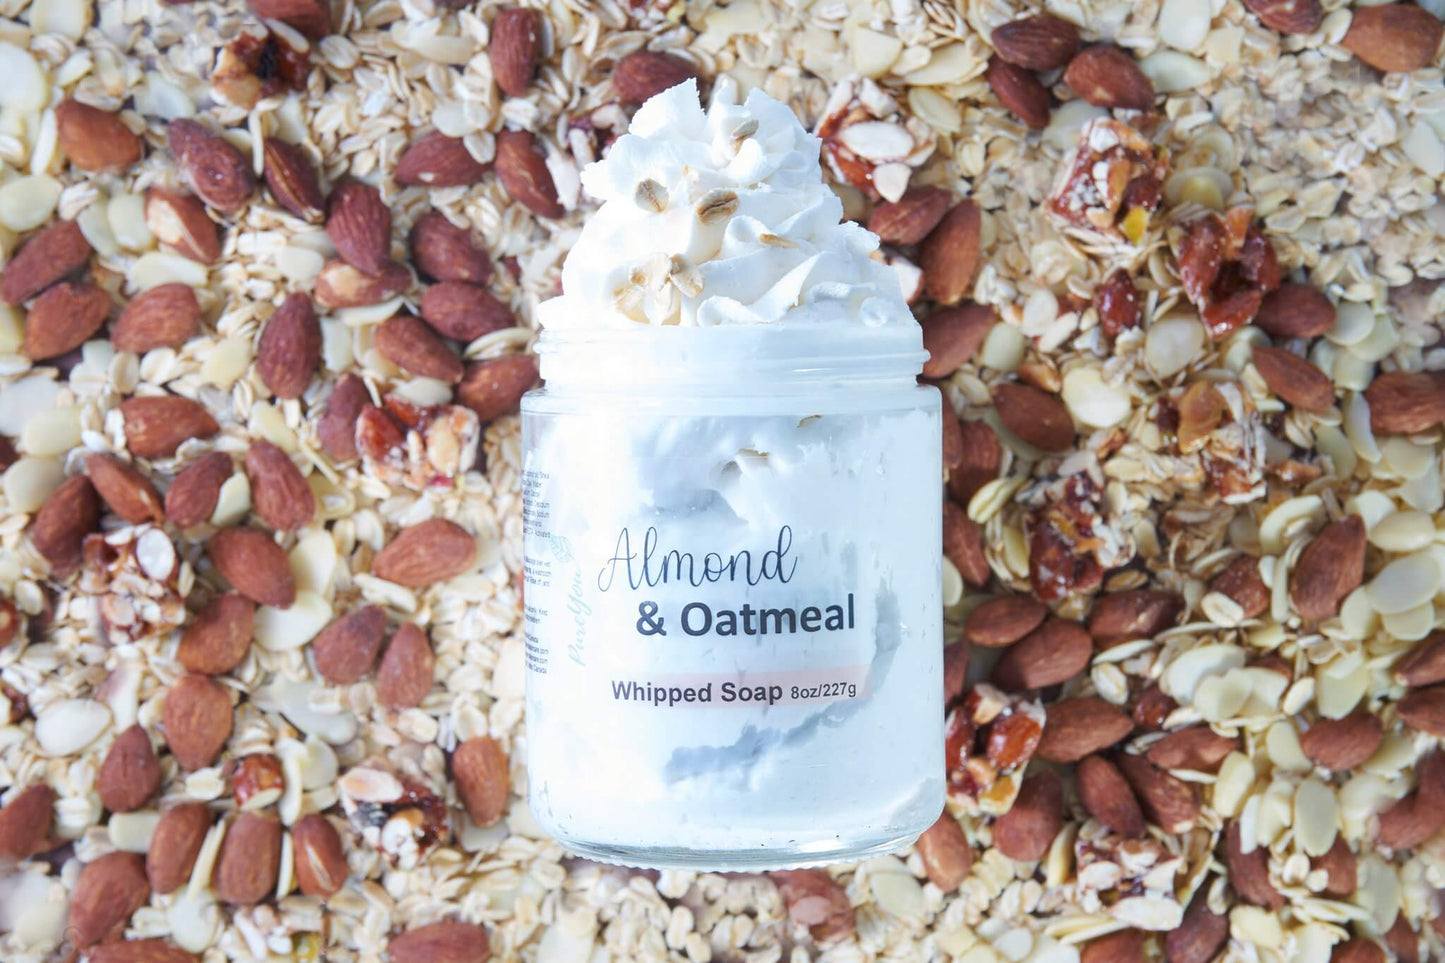 Almond & Oatmeal Whipped Soap